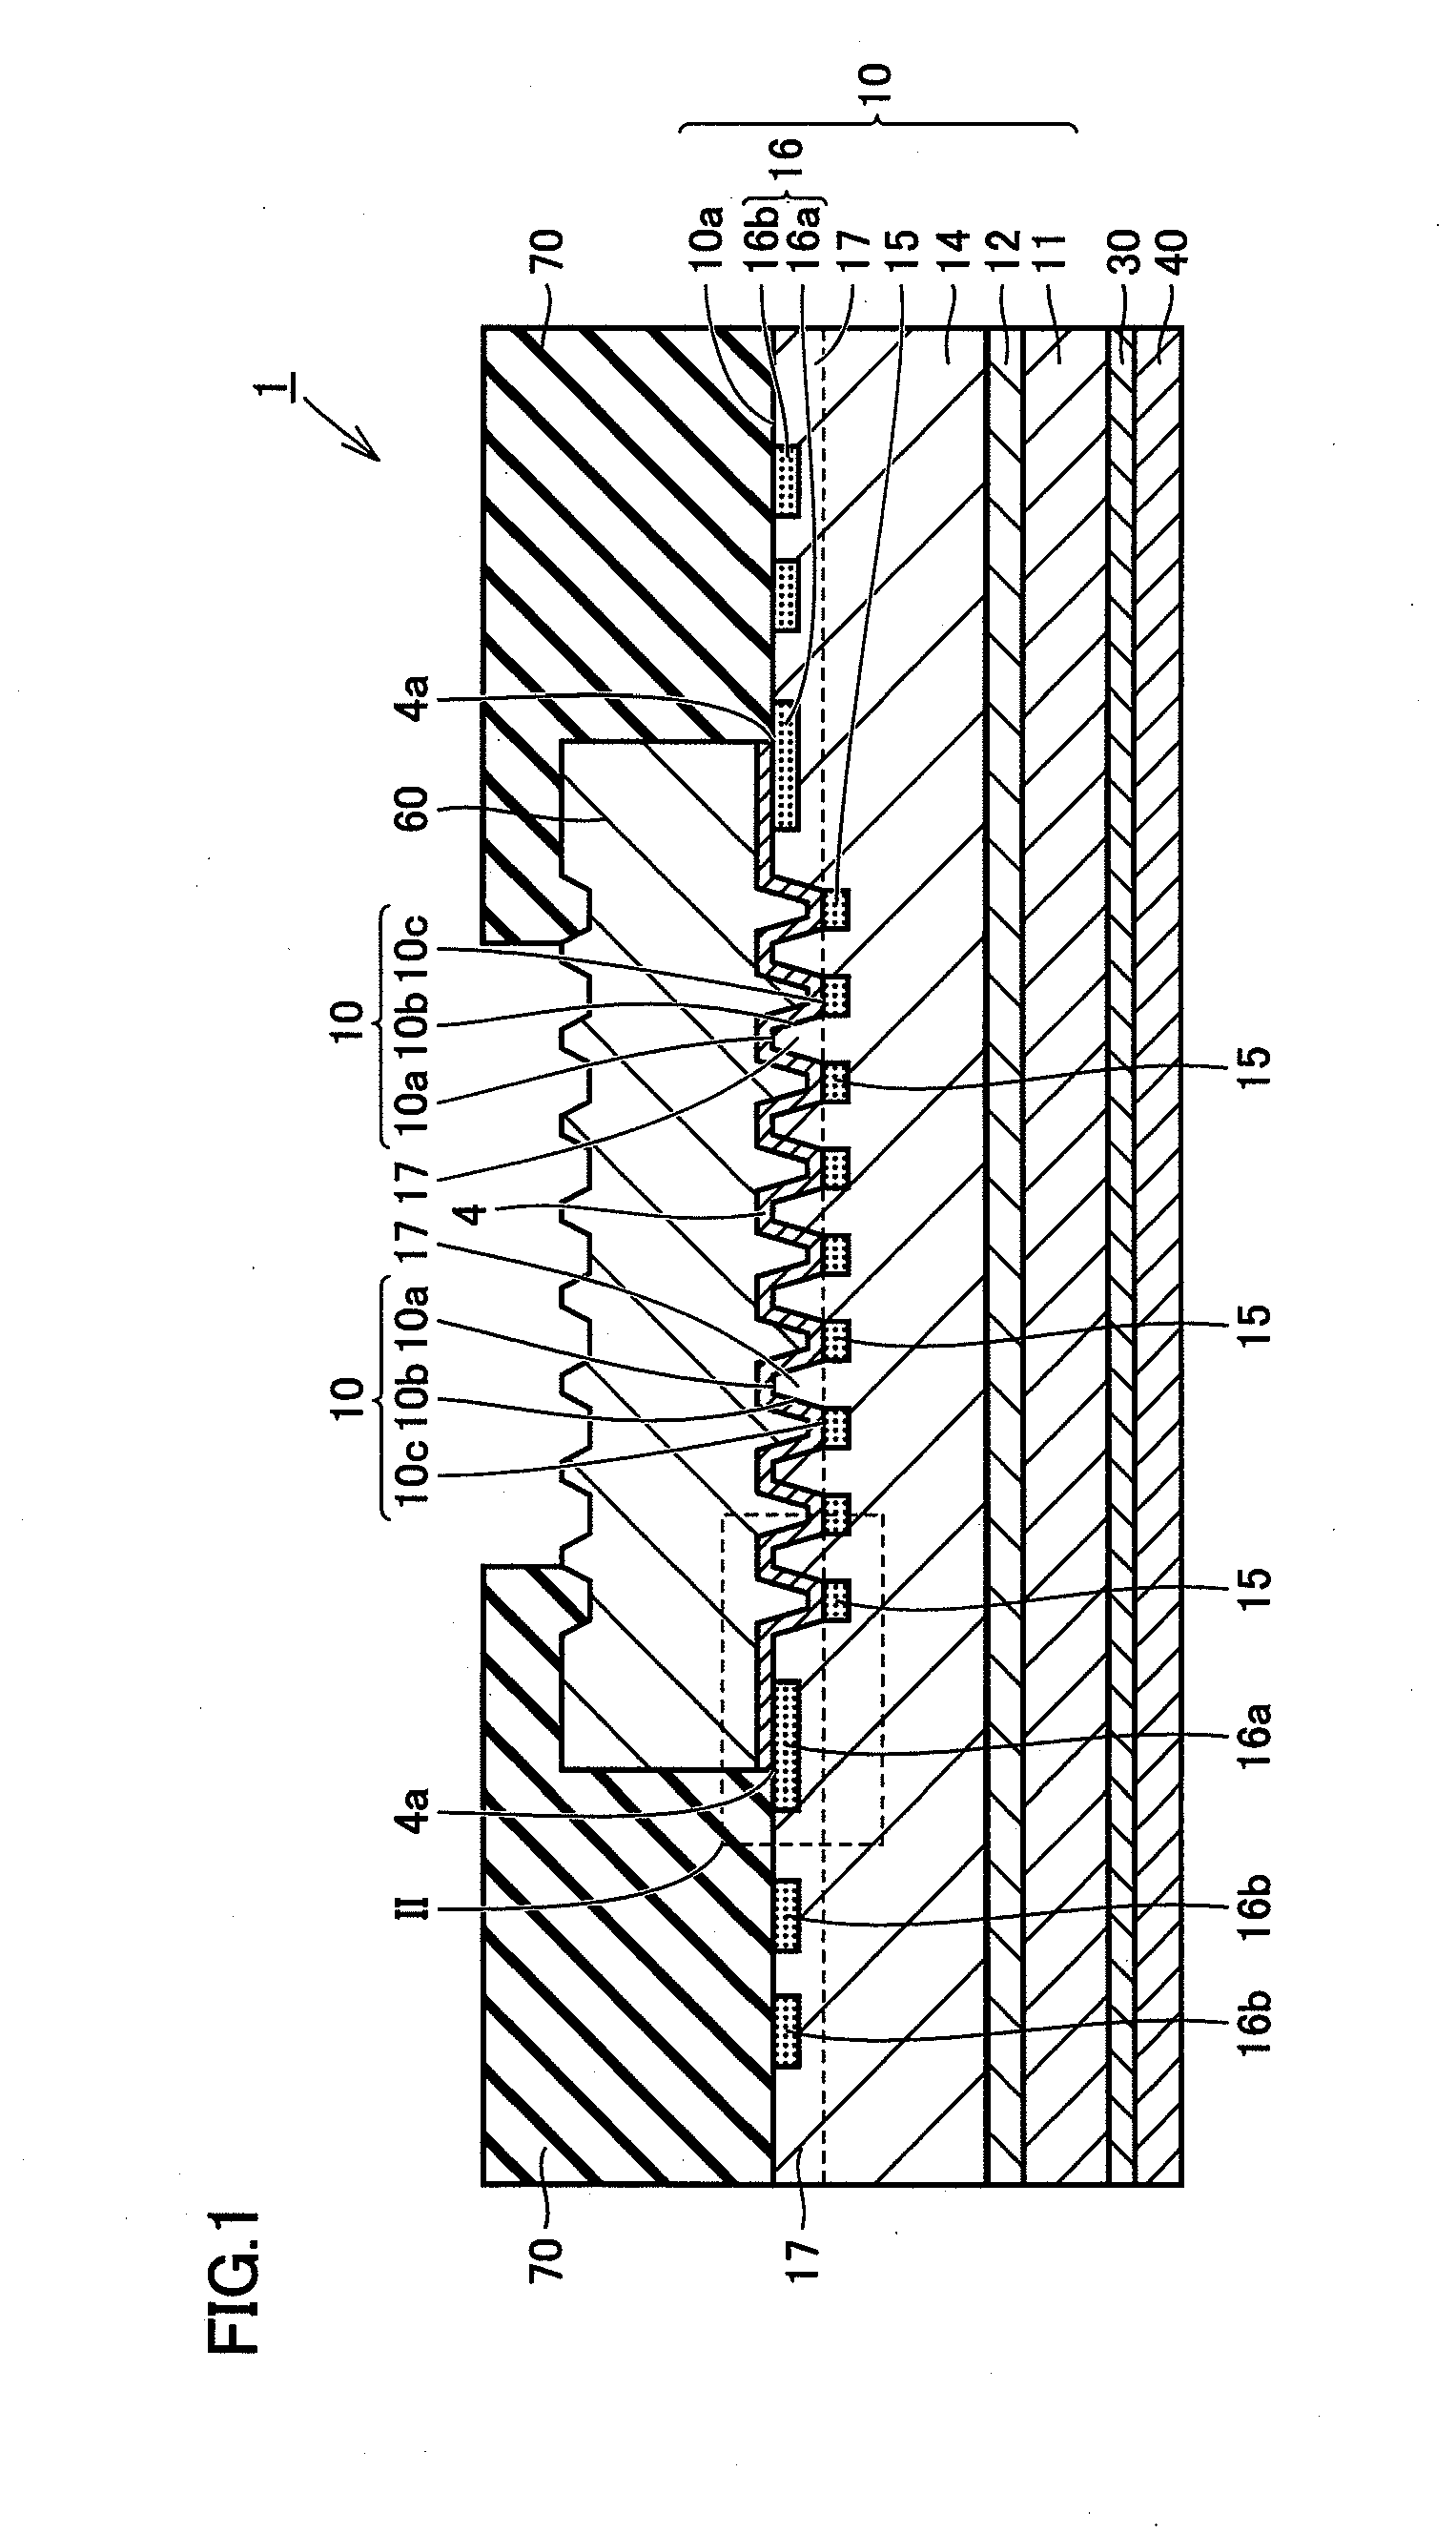 Wide gap semiconductor device and method for manufacturing same